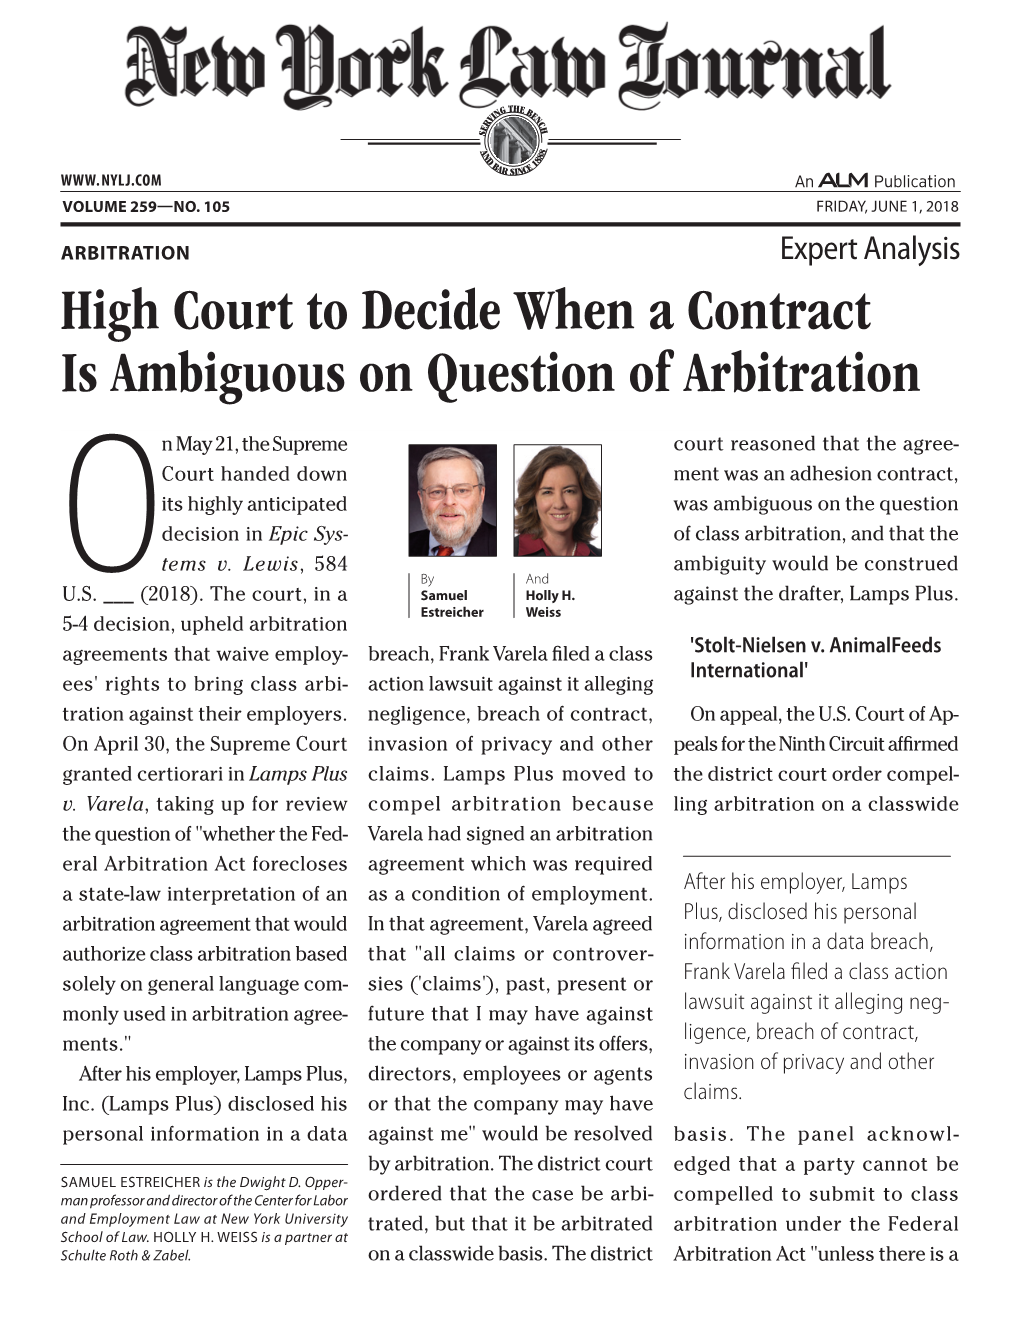 High Court to Decide When a Contract Is Ambiguous on Question of Arbitration